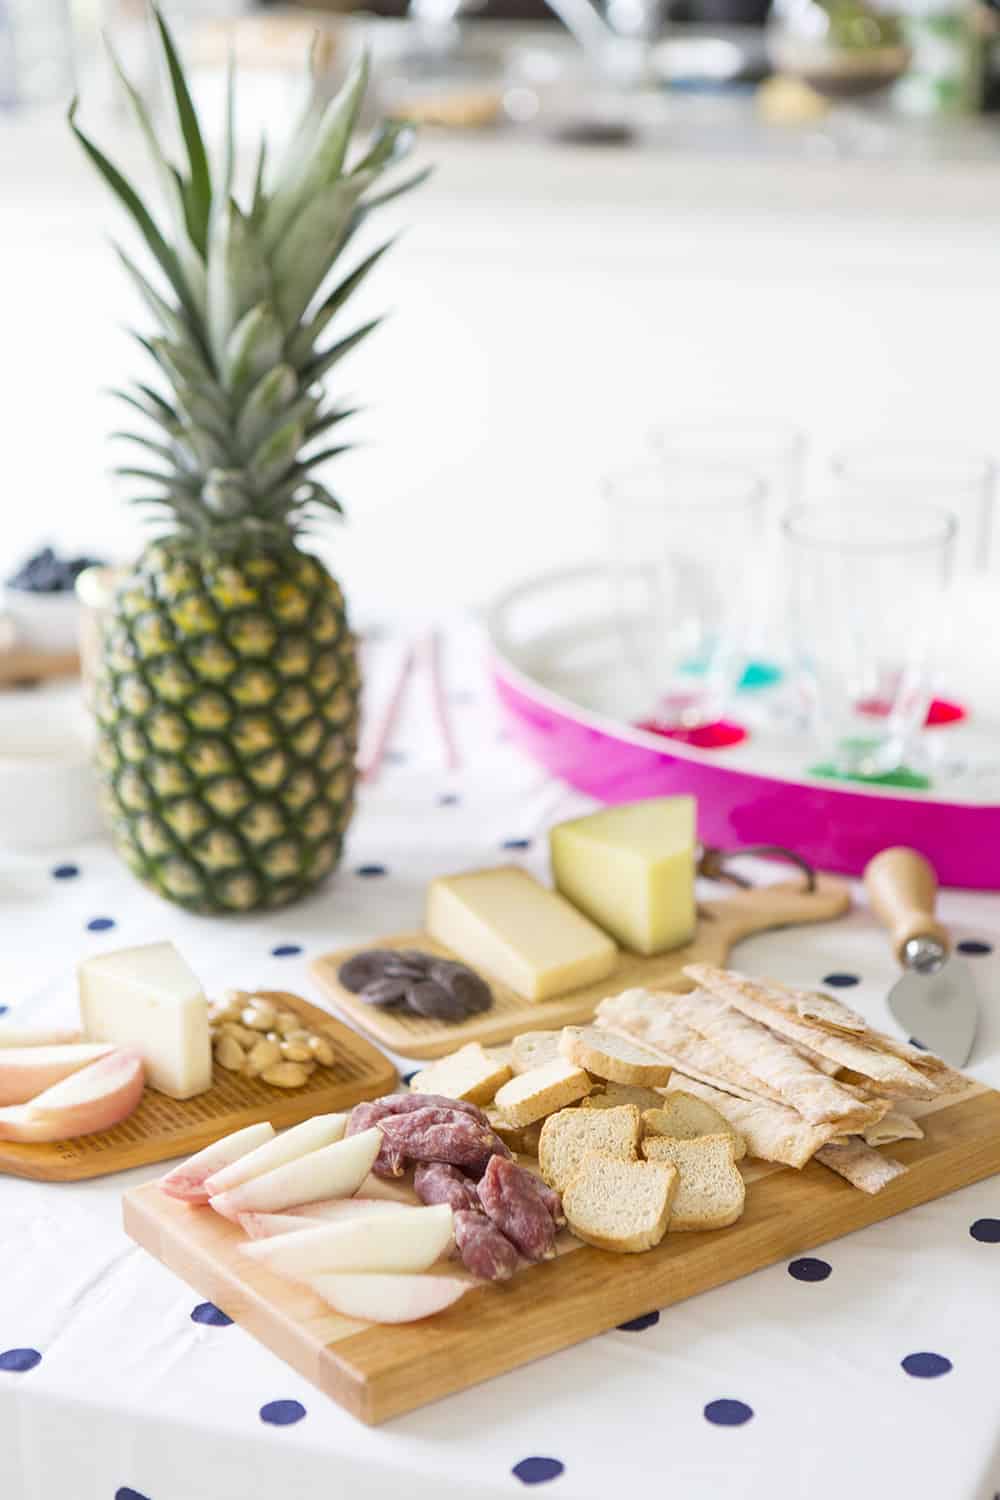 How to Host a Cheese Tasting Party